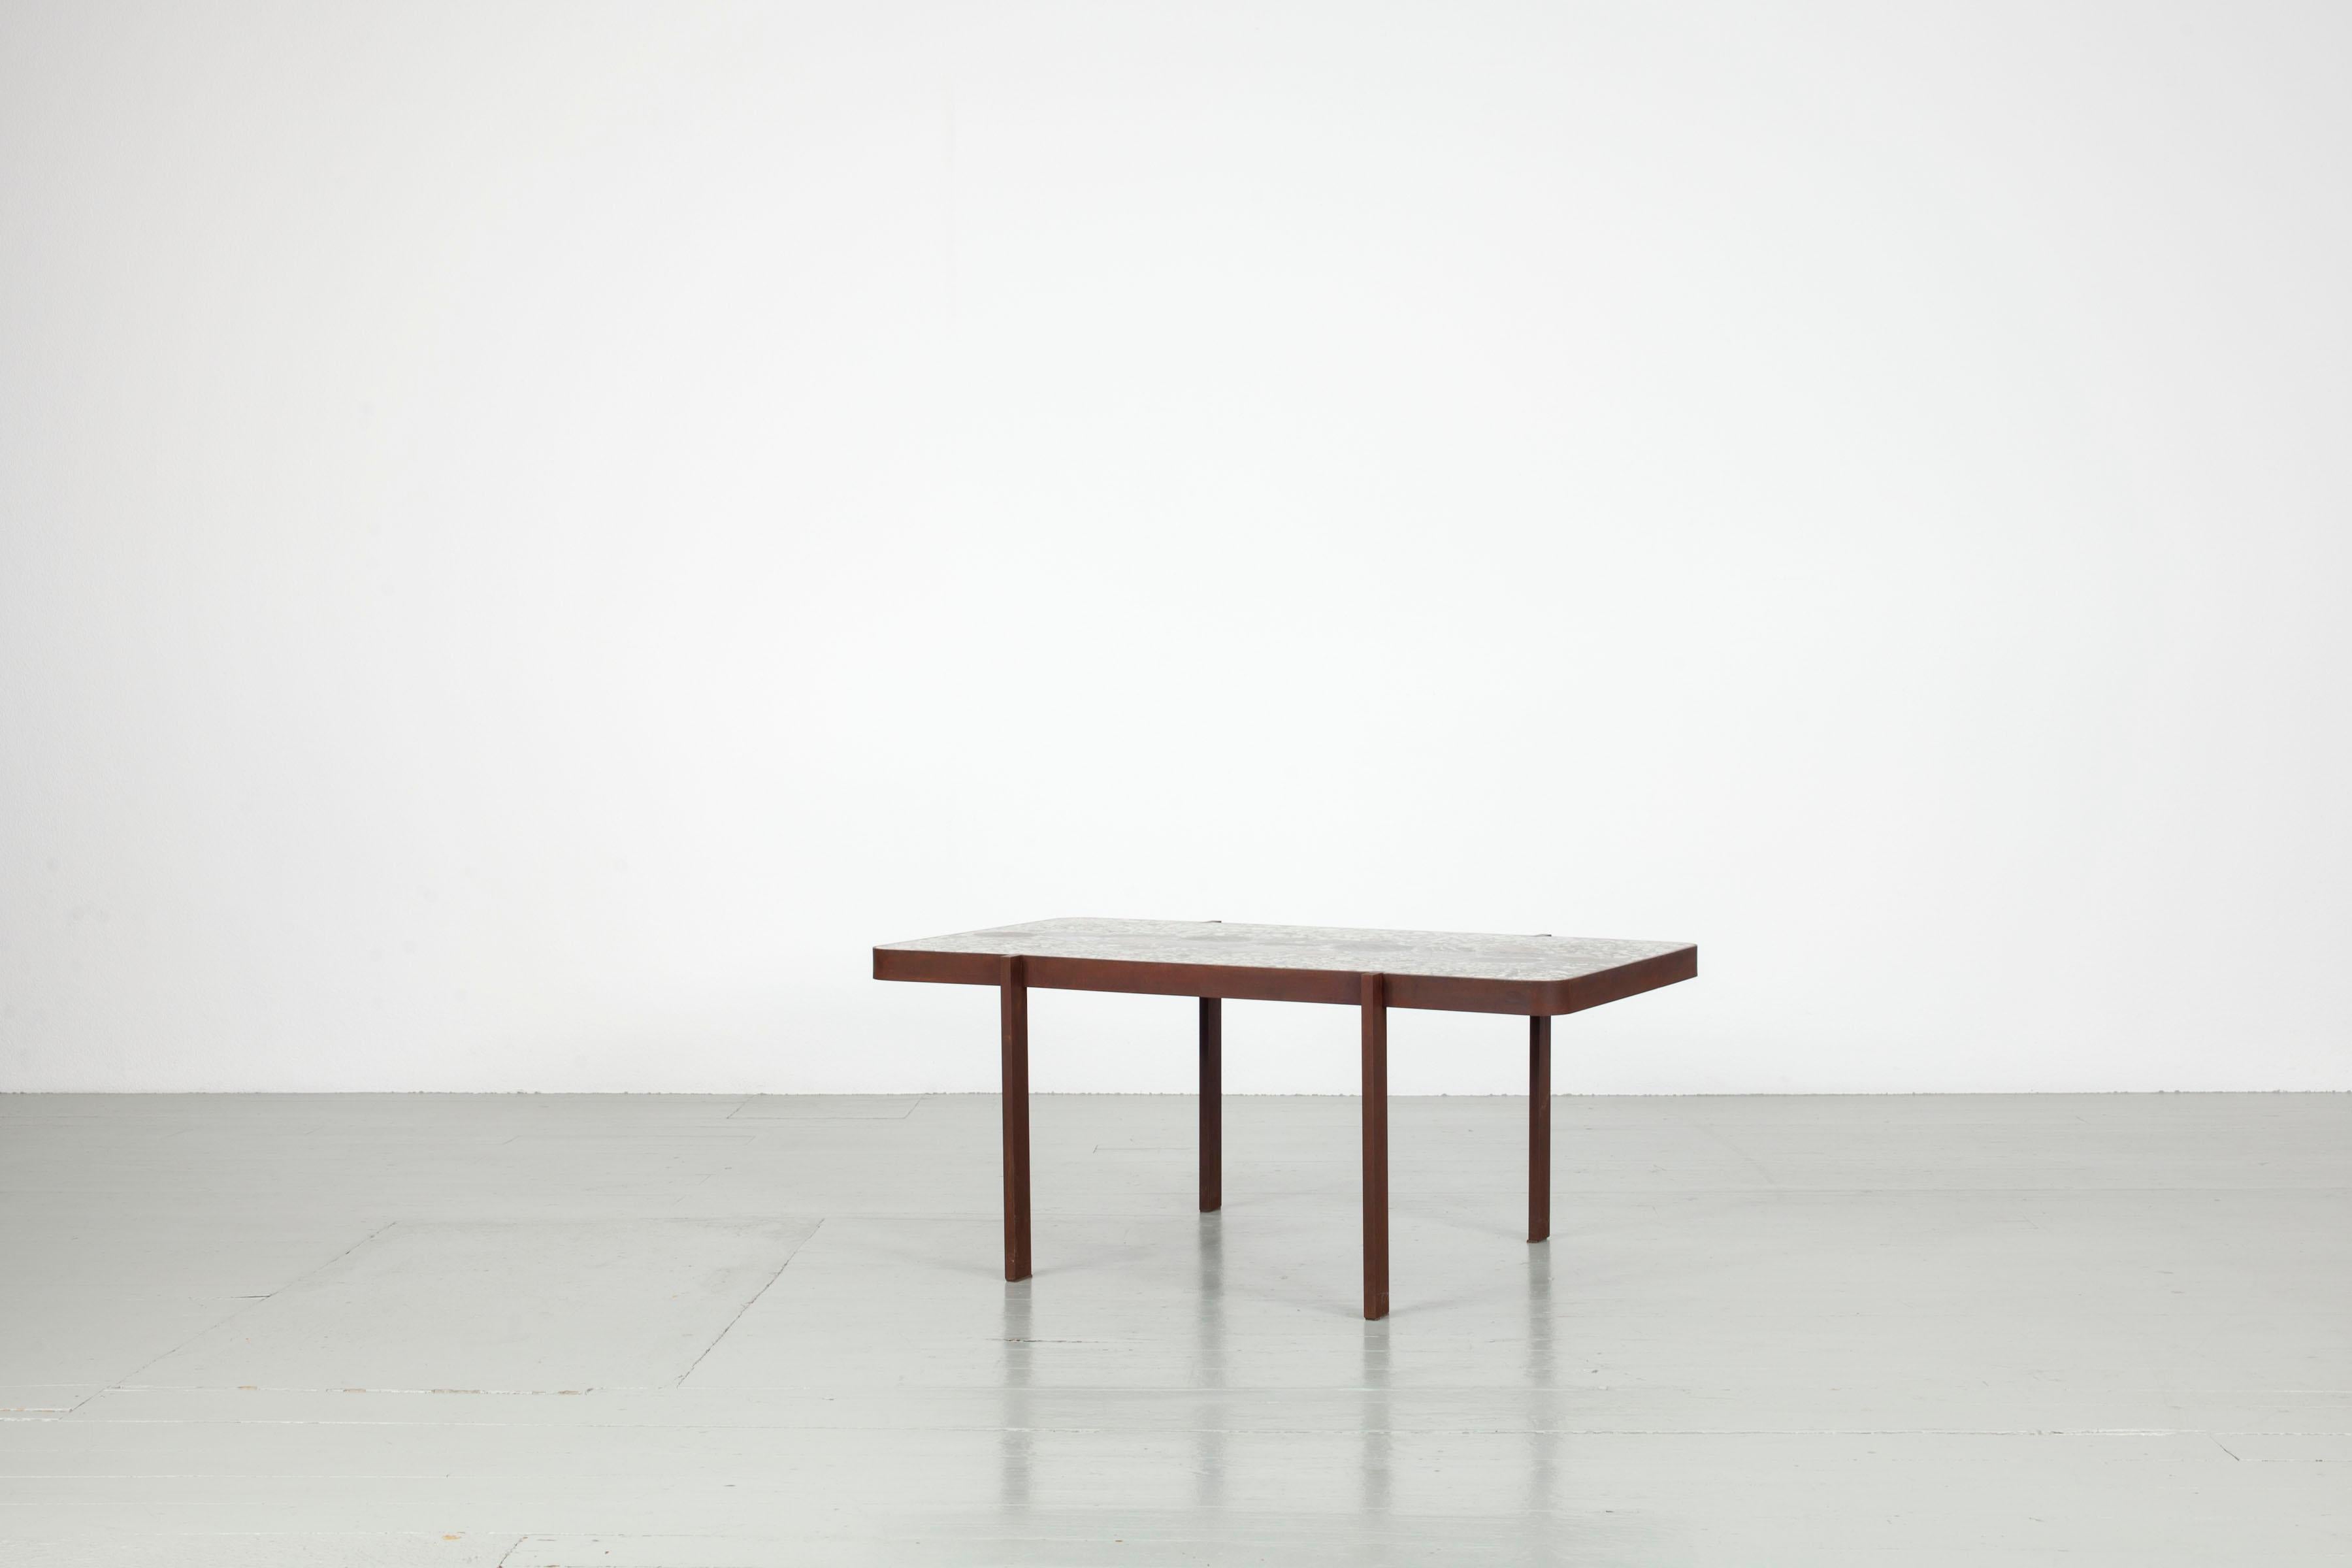 Felix Muhrhofer Contemporary Terrazzo Table with Corroded Steel Construction 1